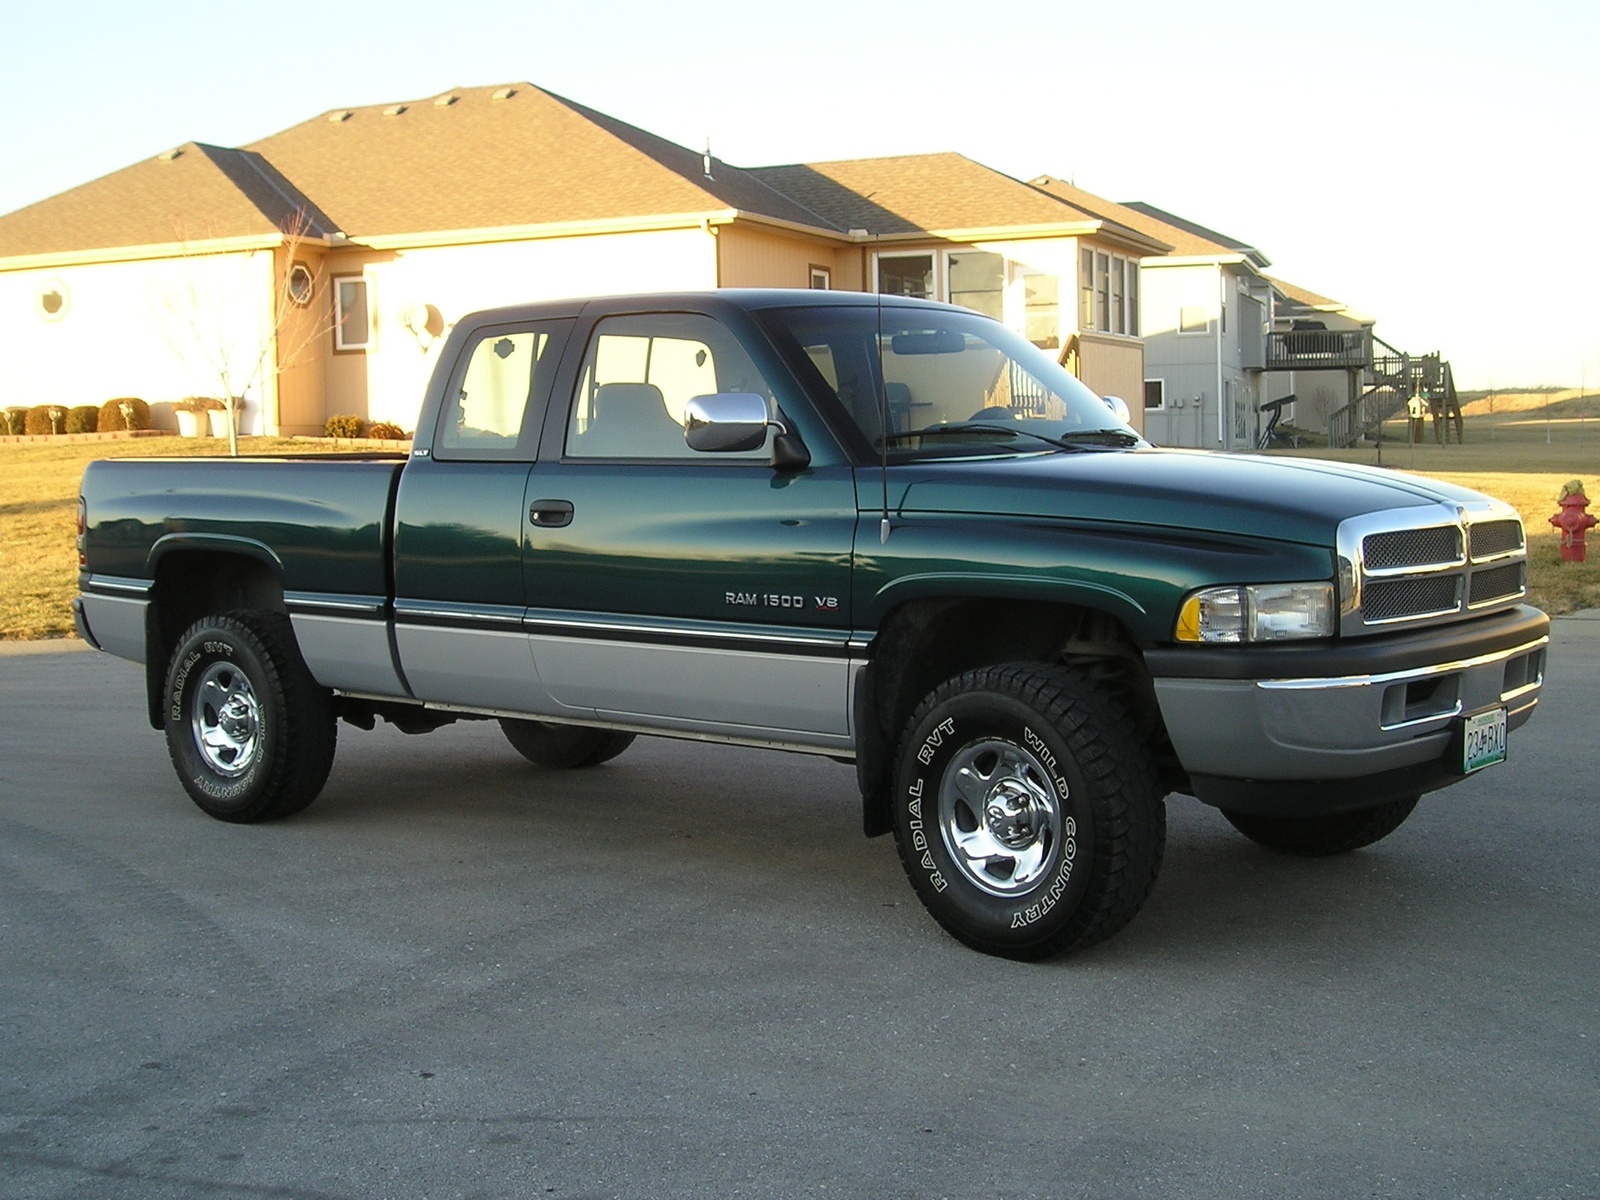 1995 Dodge Ram Pickup 1500 picture. 61 pictures · 2 videos · 14 reviews